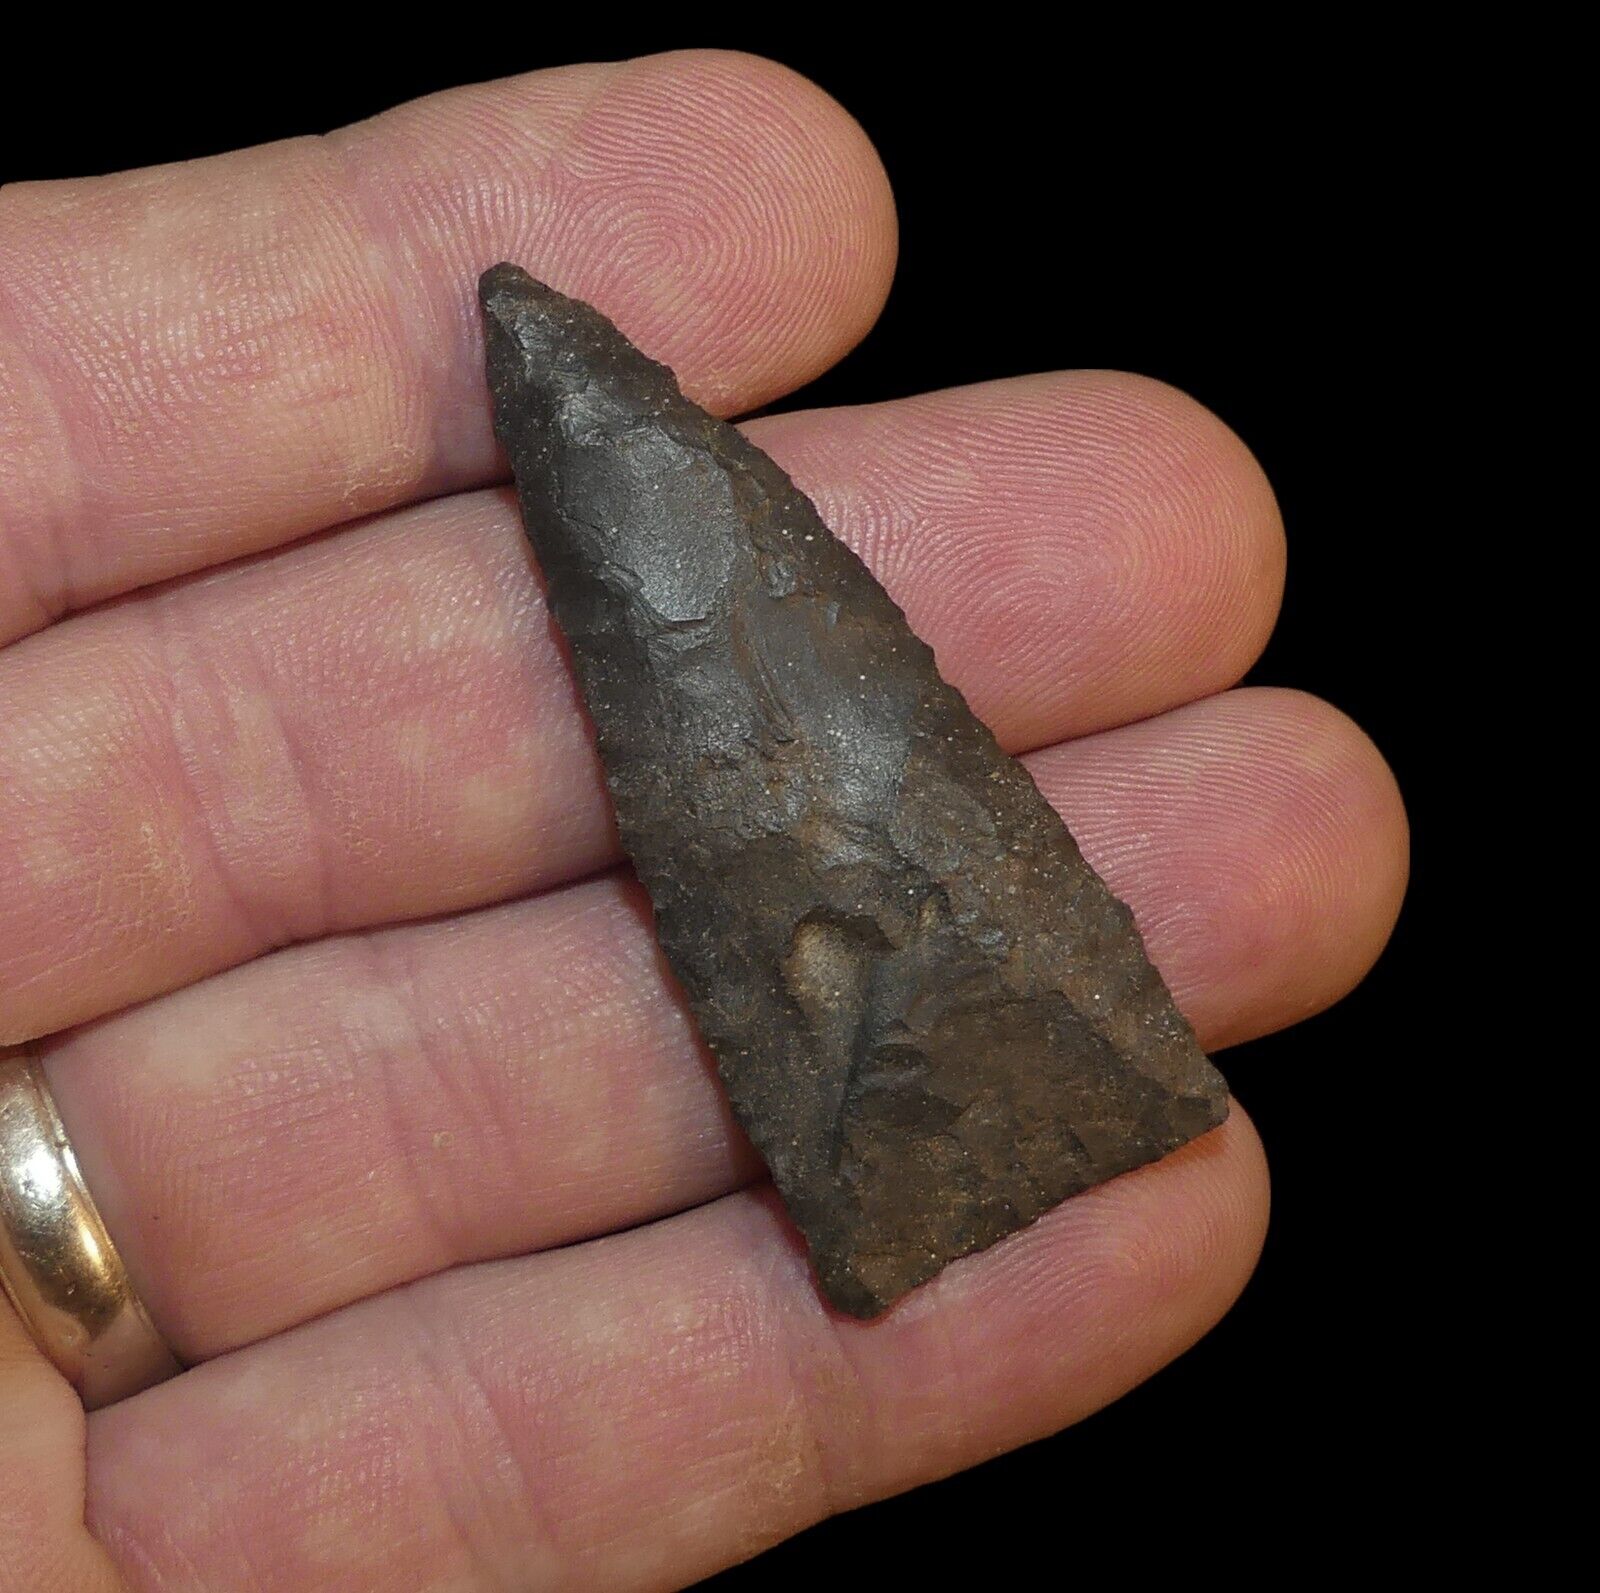 EARLY TRIANGULAR SOUTH TEXAS AUTHENTIC INDIAN ARROWHEAD ARTIFACT COLLECTIBLE